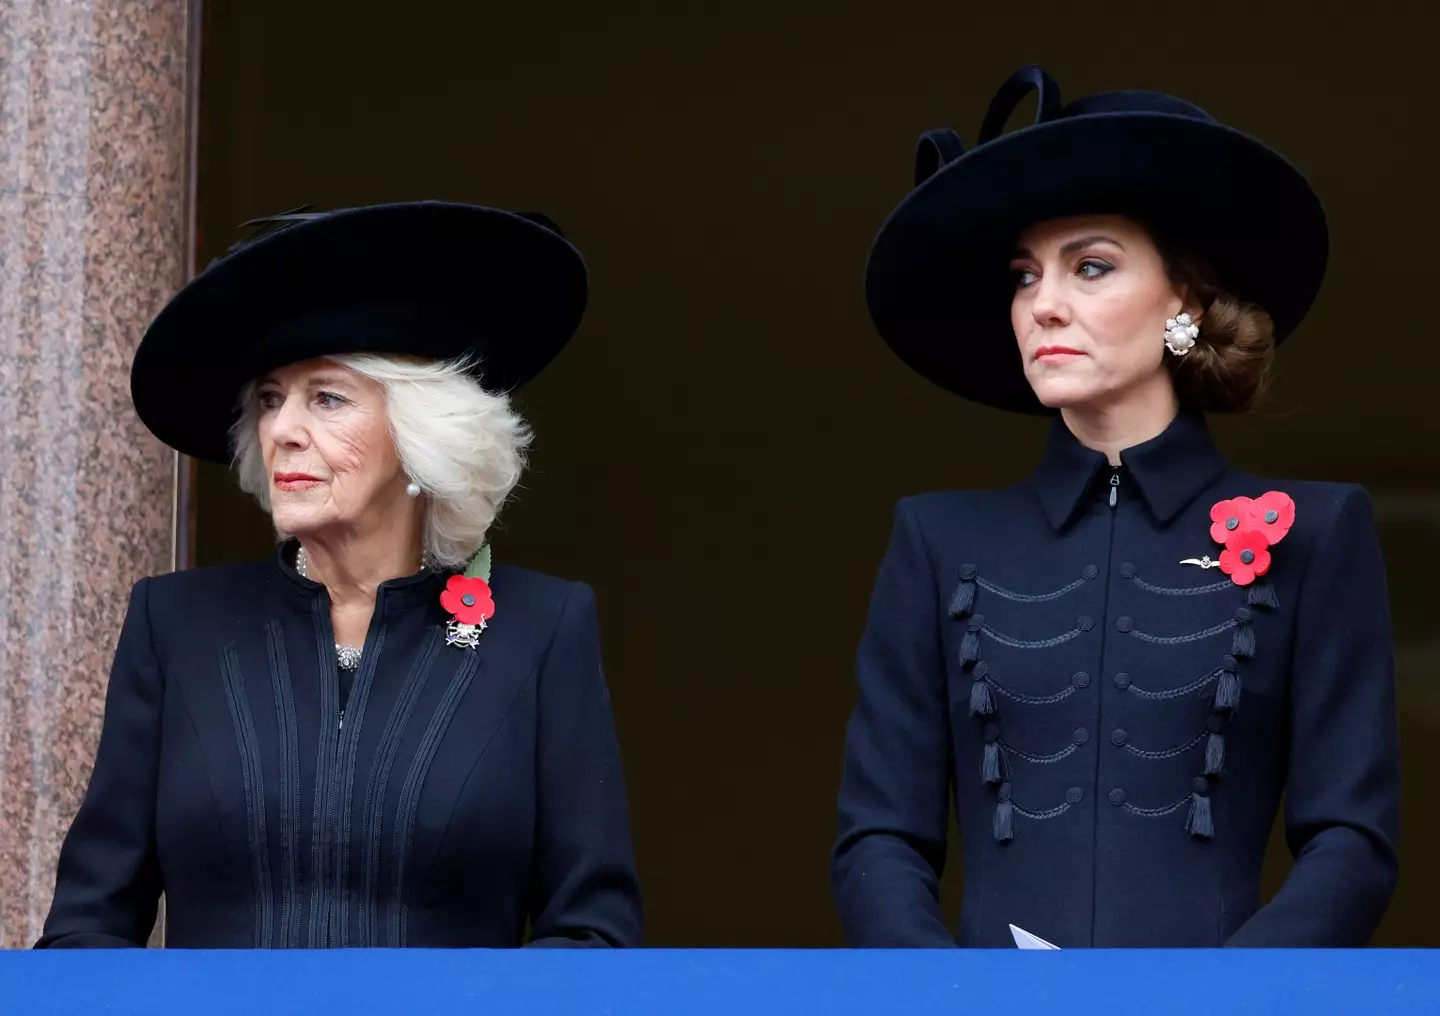 The Princess of Wales was joined by Queen Camilla.